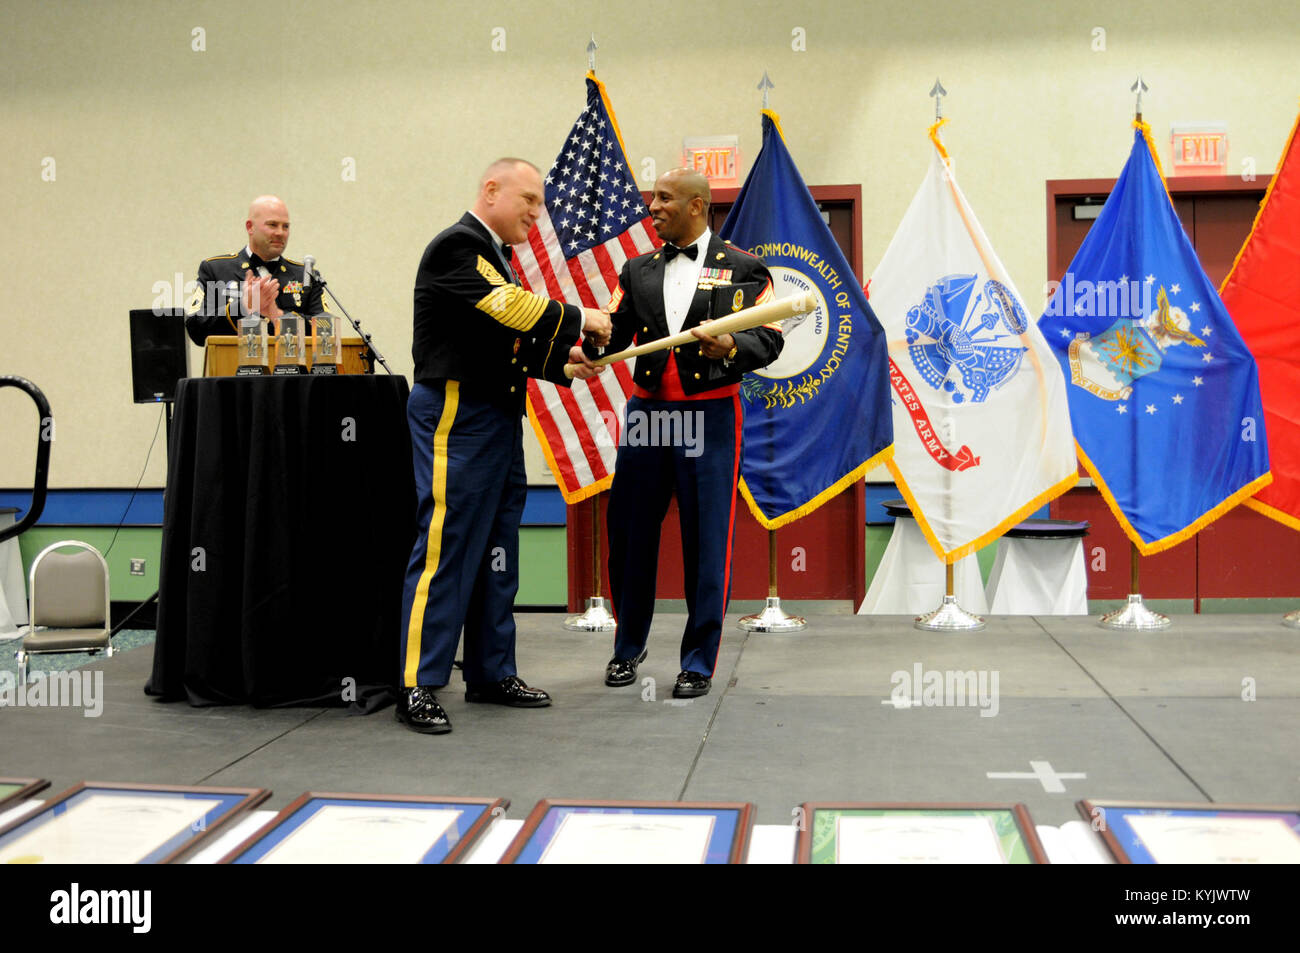 Kentucky National Guard State Command Sgt. Maj. Thomas Chumley presents Sgt. Maj. Gary Smith, 4th Marine Logistics Group command senior enlisted leader, with a custom Louisville Slugger baseball bat in appreciation for his mentorship and presence at the Kentucky National Guard's 2015 Outstanding Airman and Soldier of the Year Banquet March 14, 2015, in Louisville, Kentucky. Smith served alongside Chumley and the Kentucky National Guard's 2nd Battalion, 138th Field Artillery during a 2012 deployment to the Horn of Africa. The annual awards dinner honors Kentucky's finest Airmen and Soldiers who Stock Photo